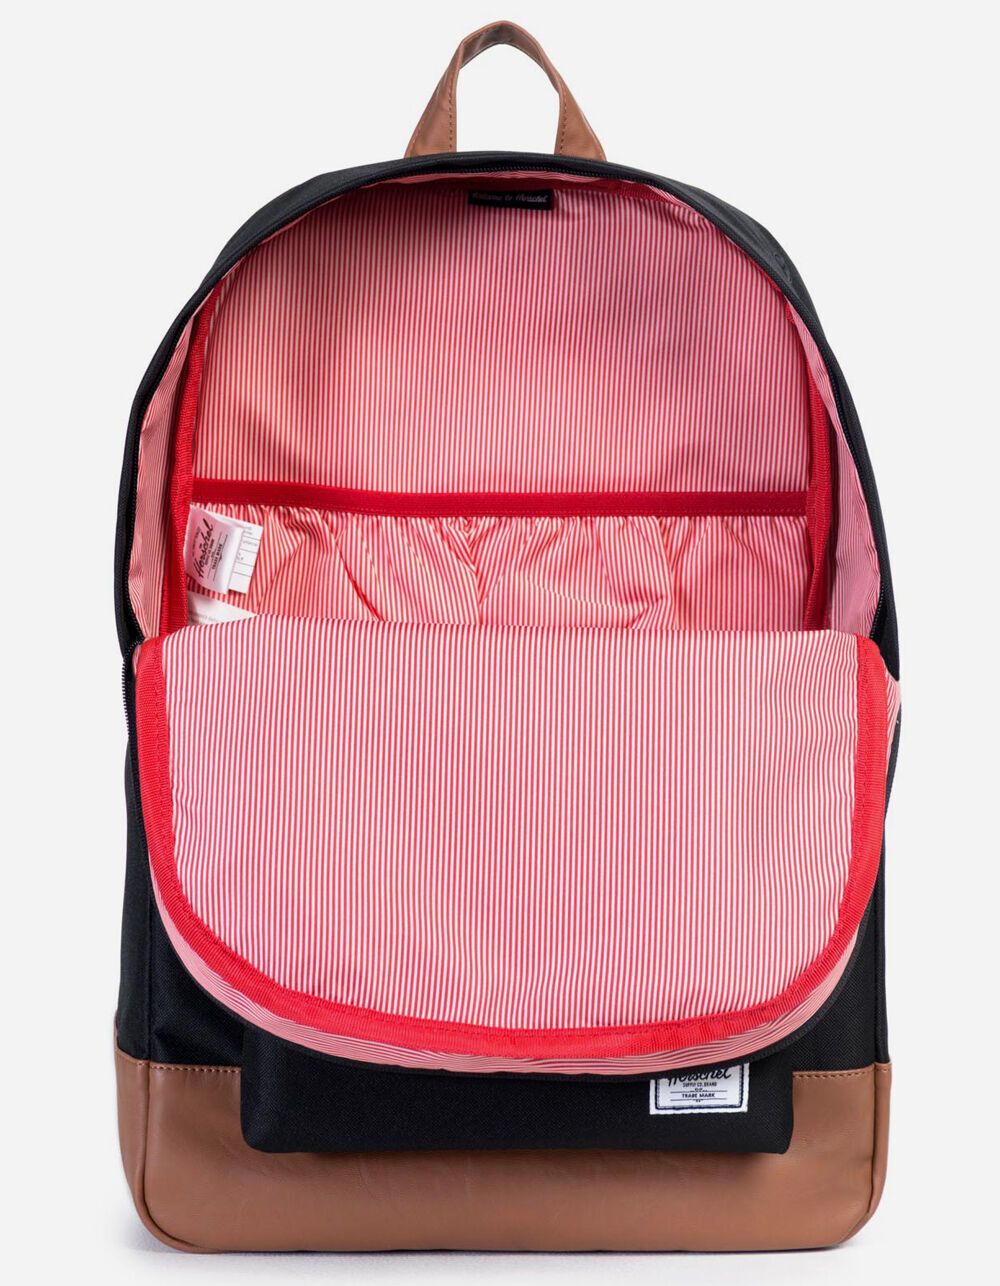 Under One Sky Mini Backpack Black - $15 (50% Off Retail) - From Desiree